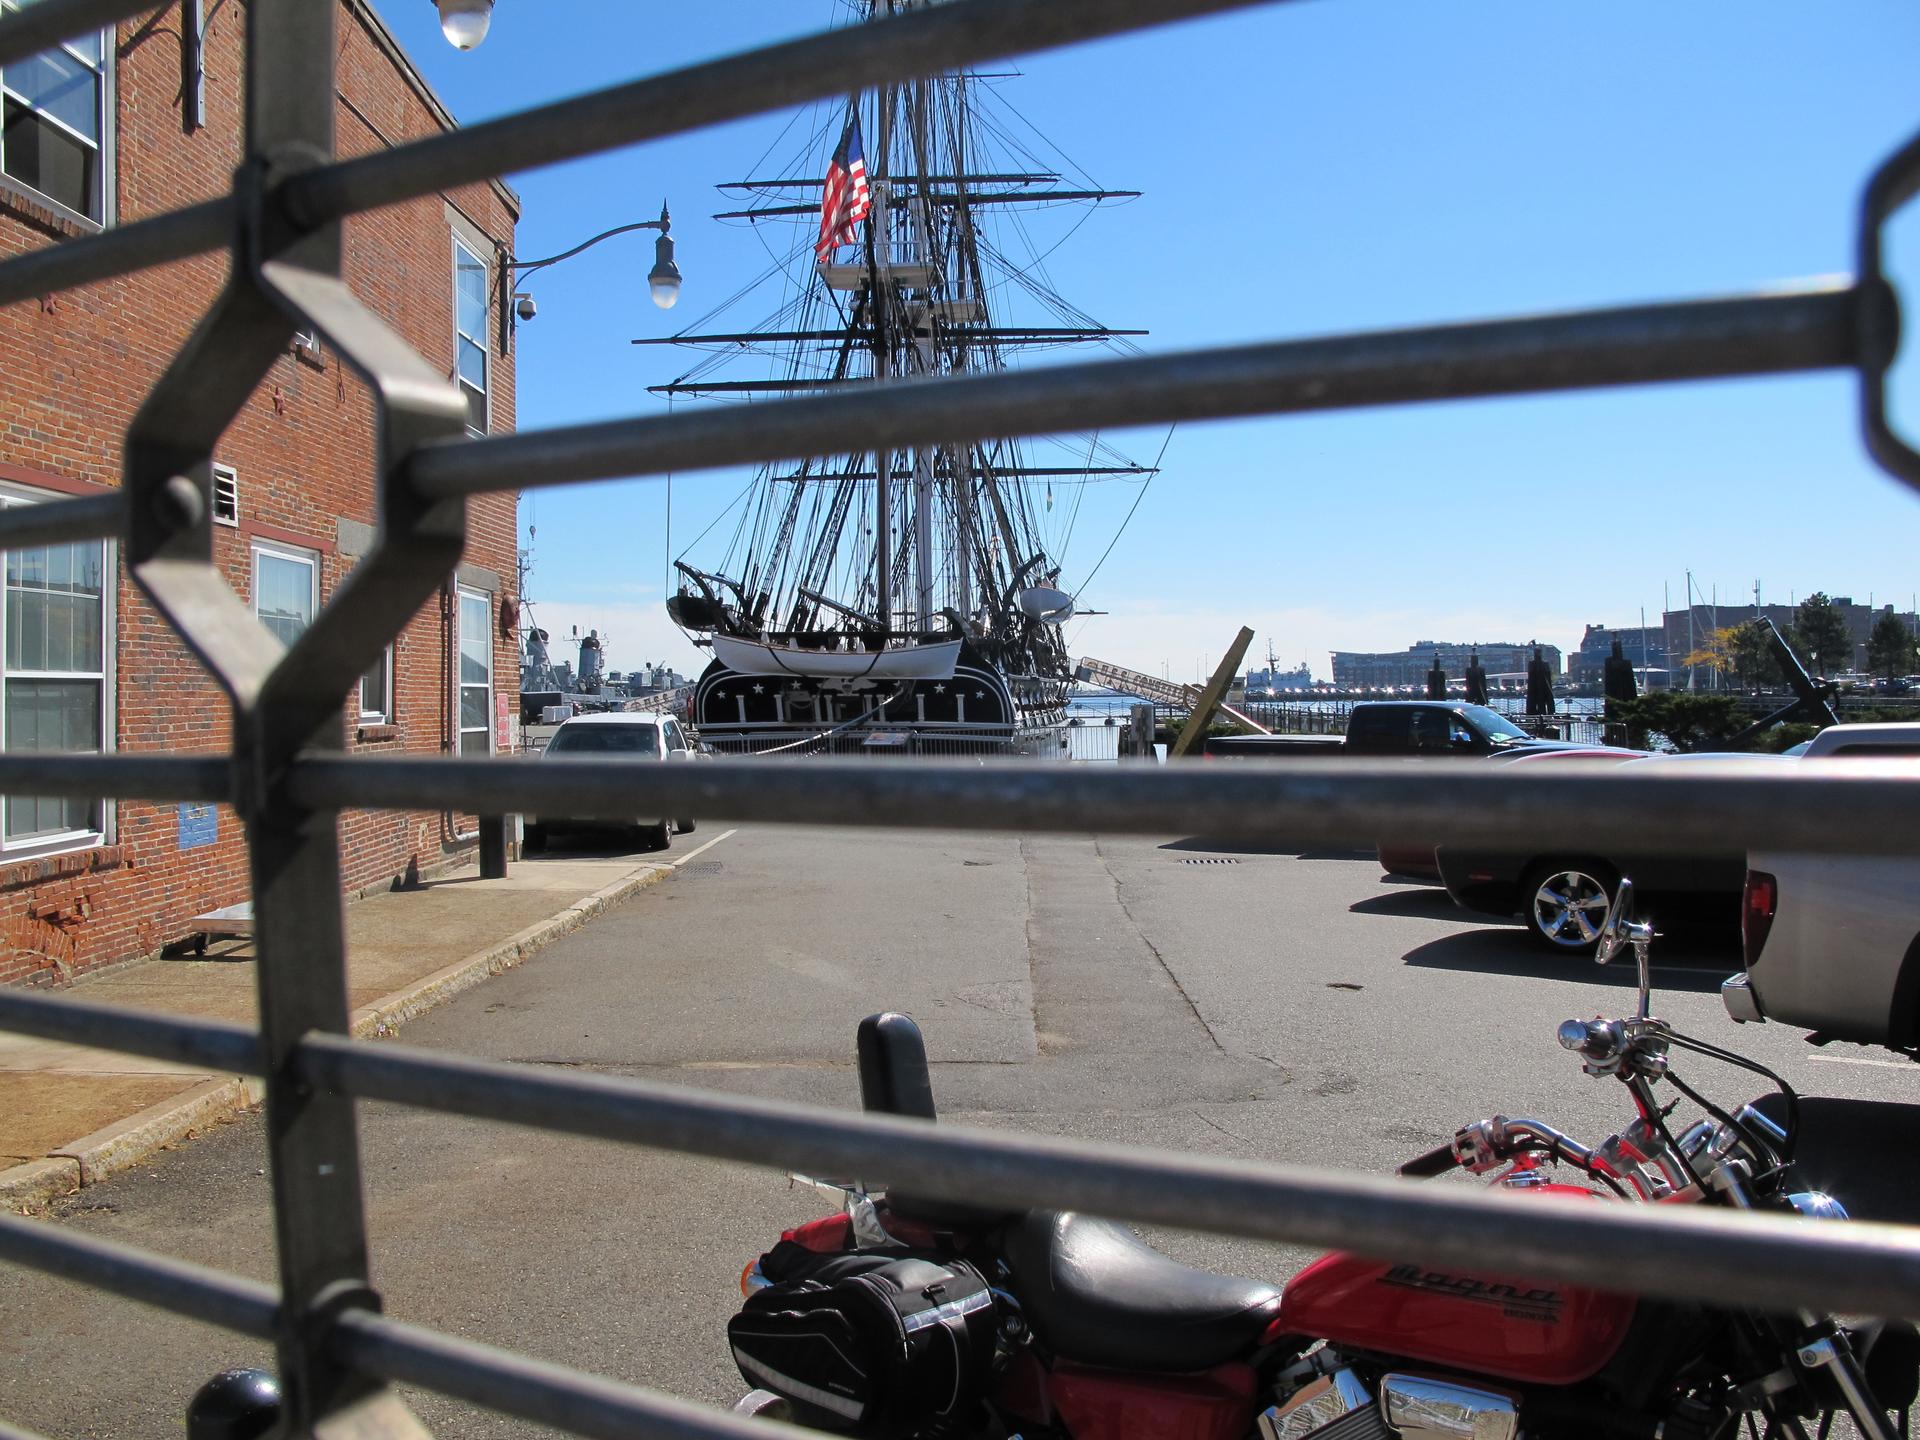 Tourists were being dropped off by the busload at the USS Constitution, and some were surprised to hear the ship was closed.